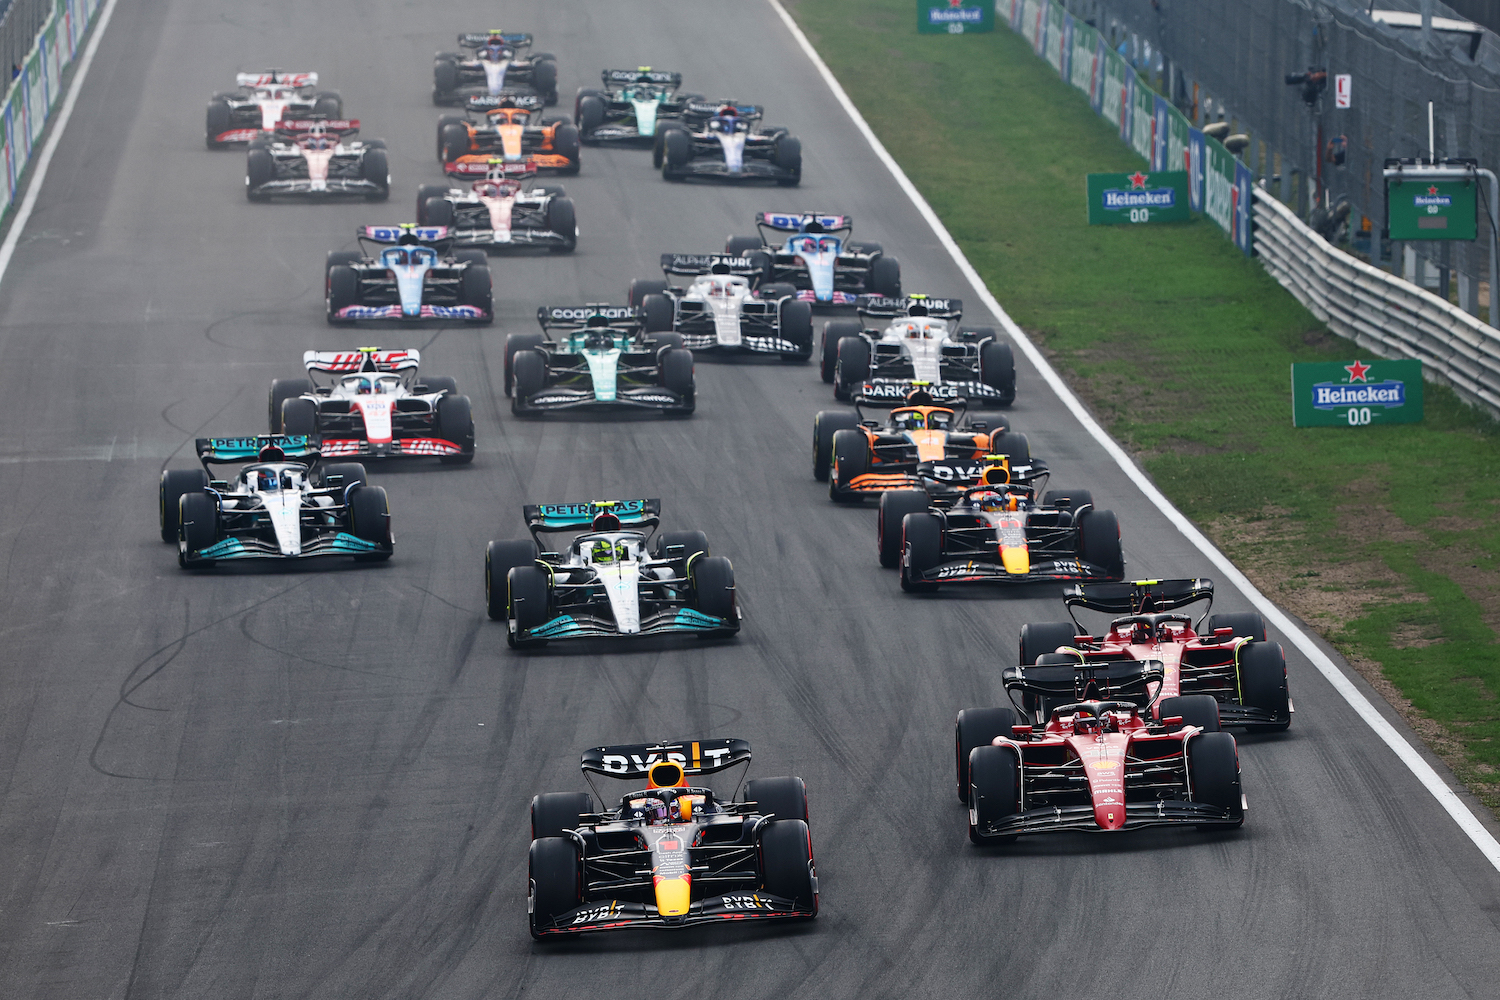 A pack of Formula 1 cars accelerating from the starting line of a race track during a grand prix.